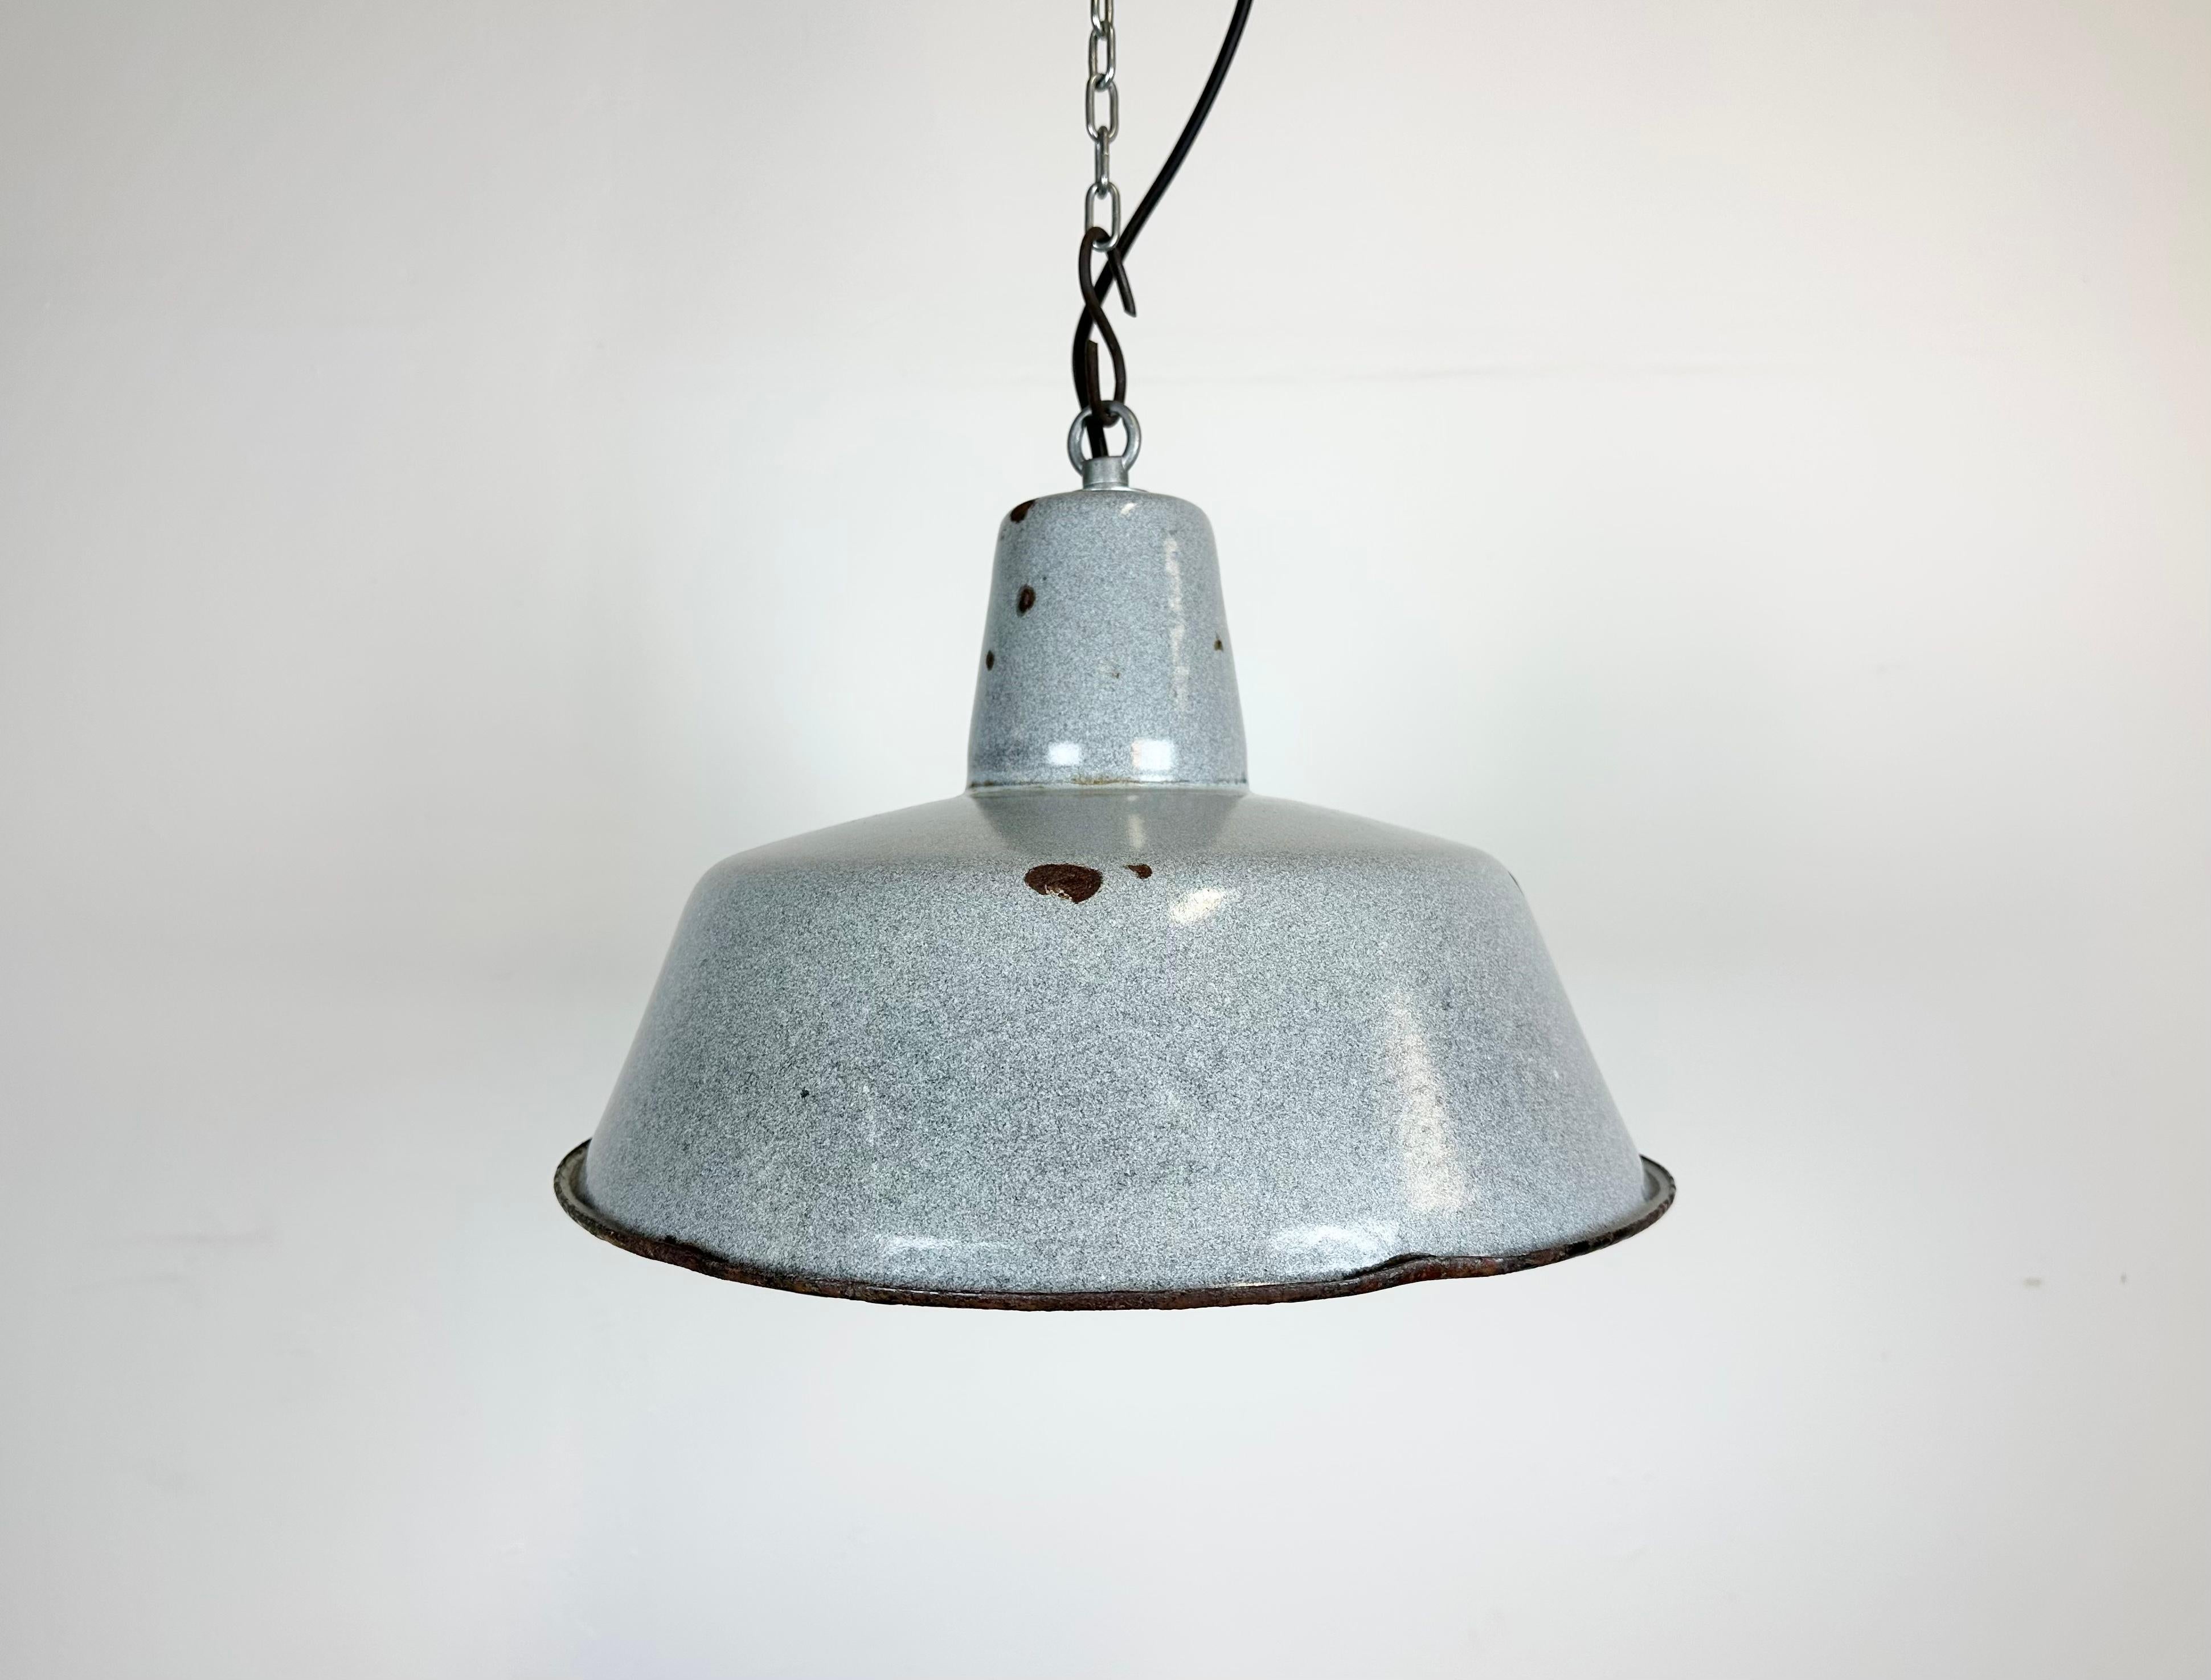 Industrial grey enamel pendant light made in Poland during the 1960s. White enamel inside the shade. Iron top. The porcelain socket requires E 27/ E 26 light bulbs. New wire. Fully functional. The weight of the lamp is 1,2 kg.